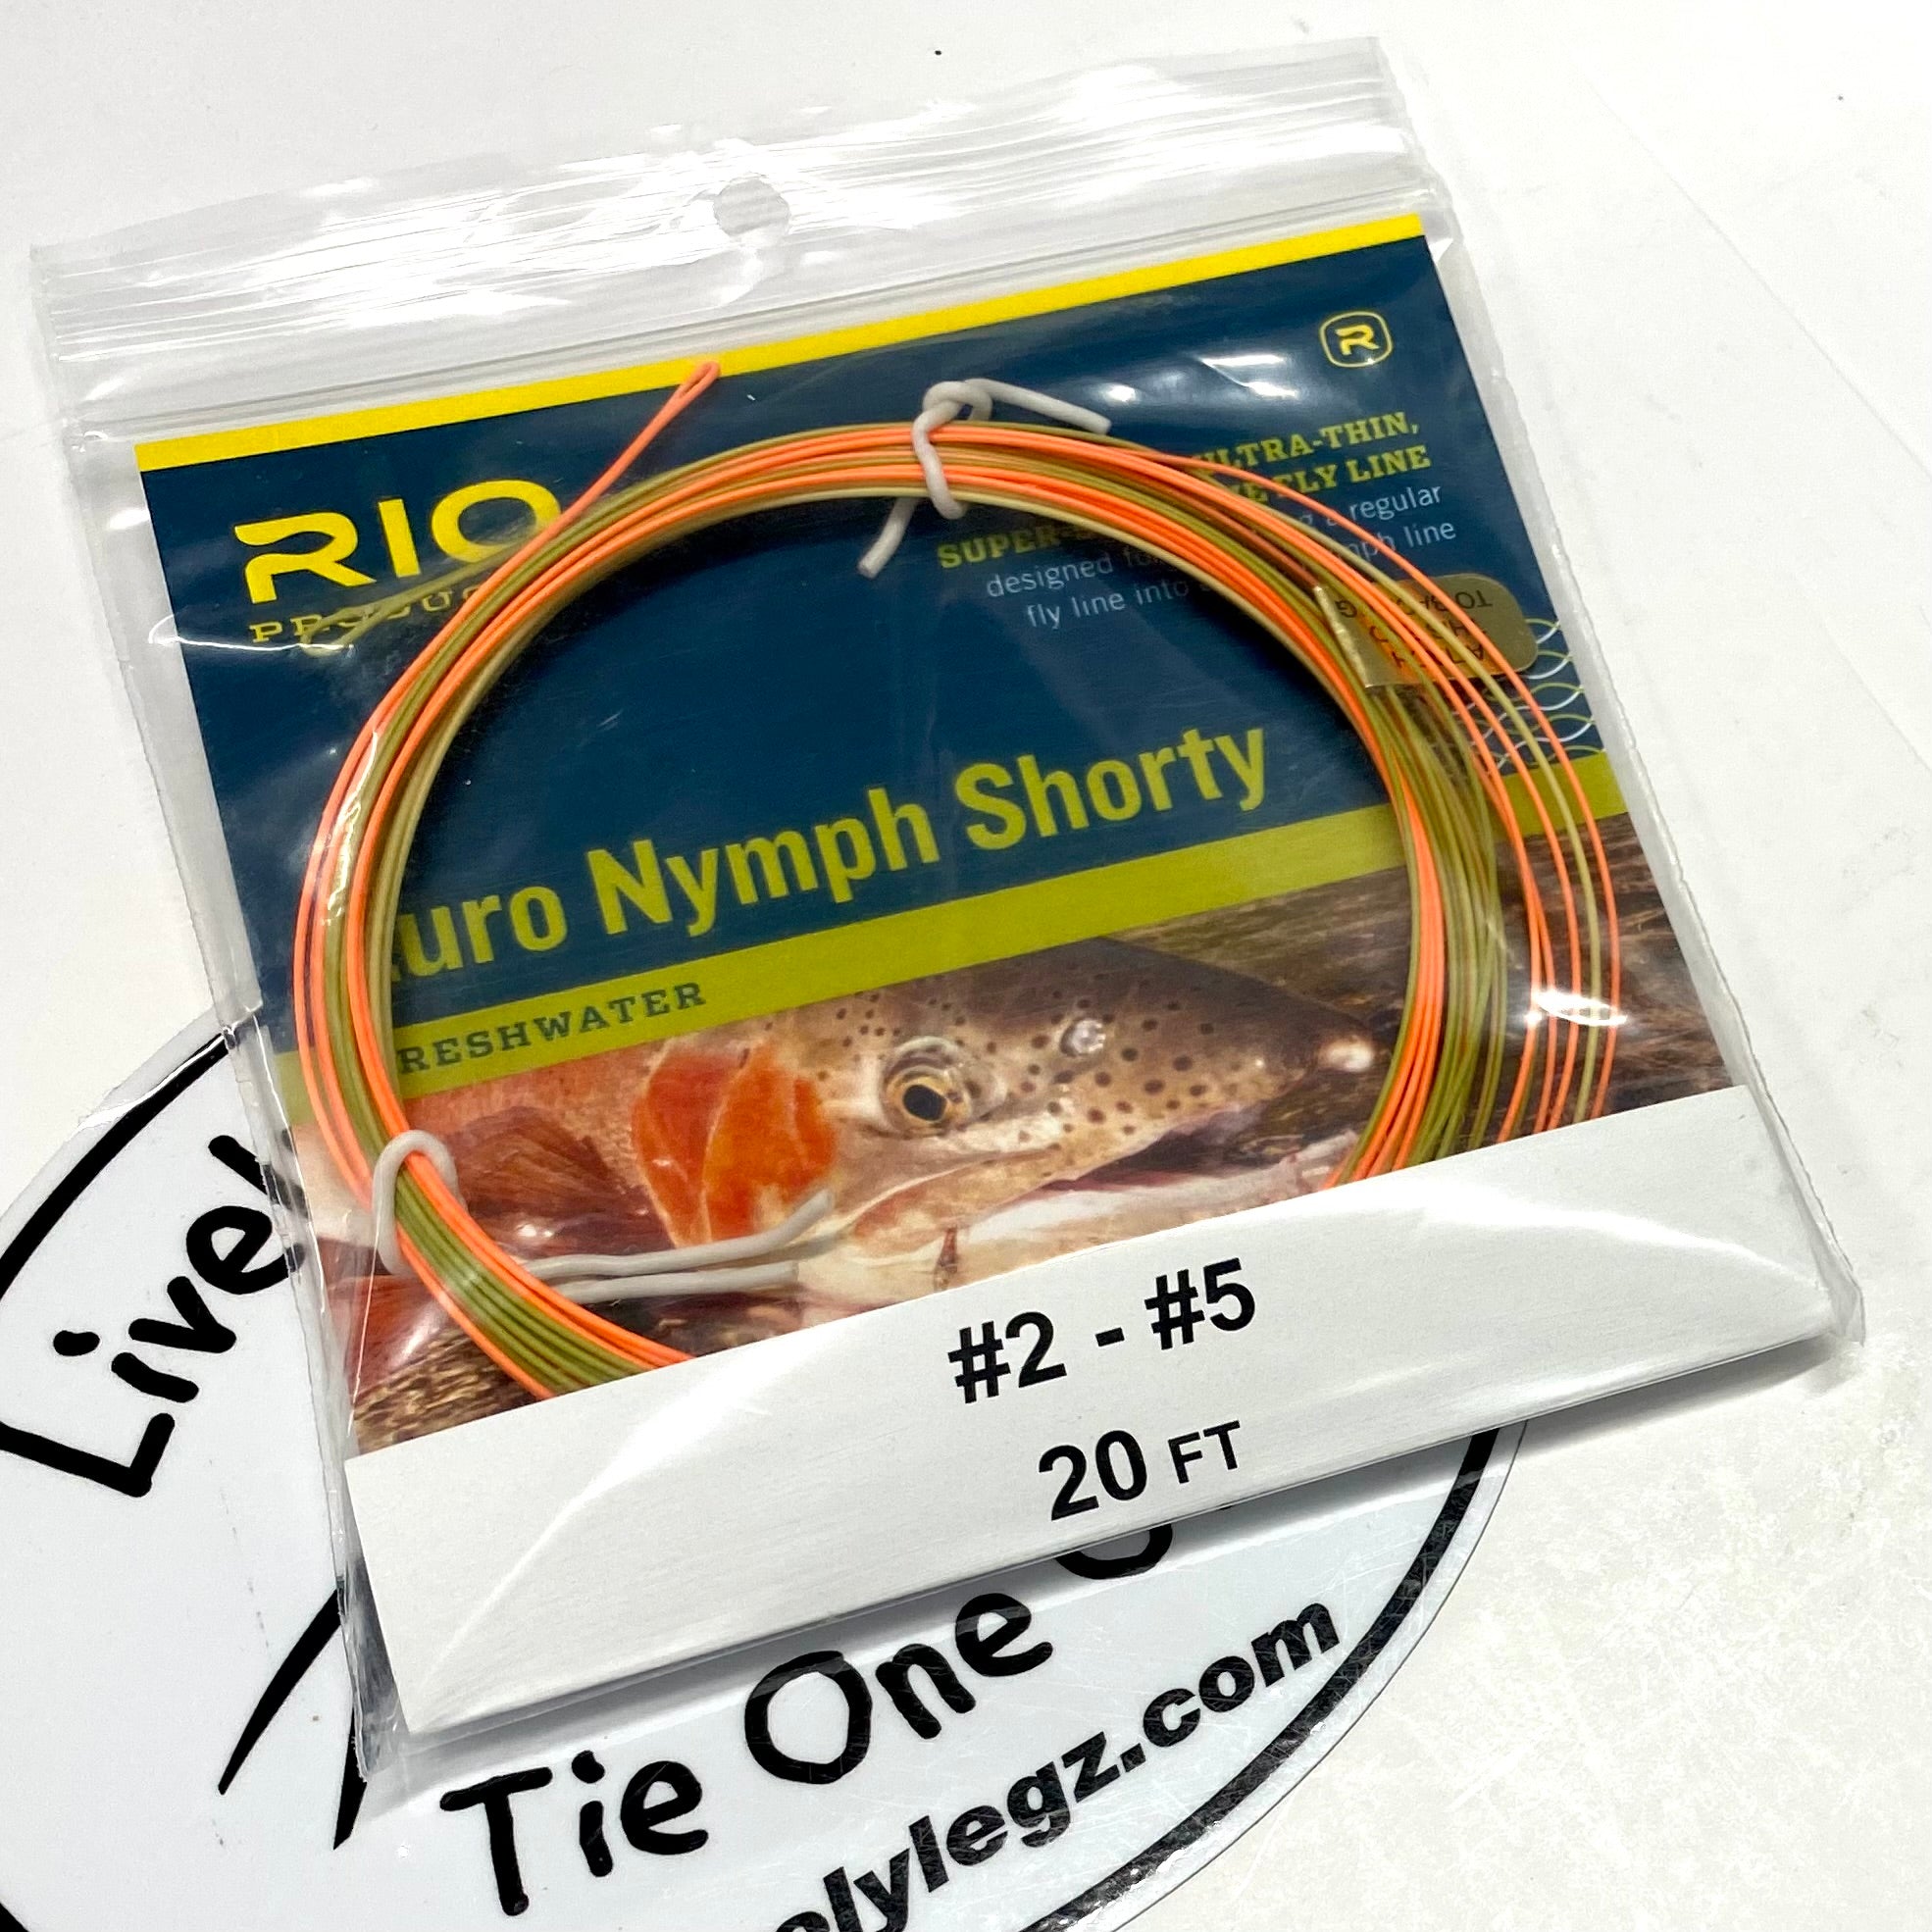 RIO Euro Nymph Shorty Fly Line (Overall Length 20') – Lively Legz